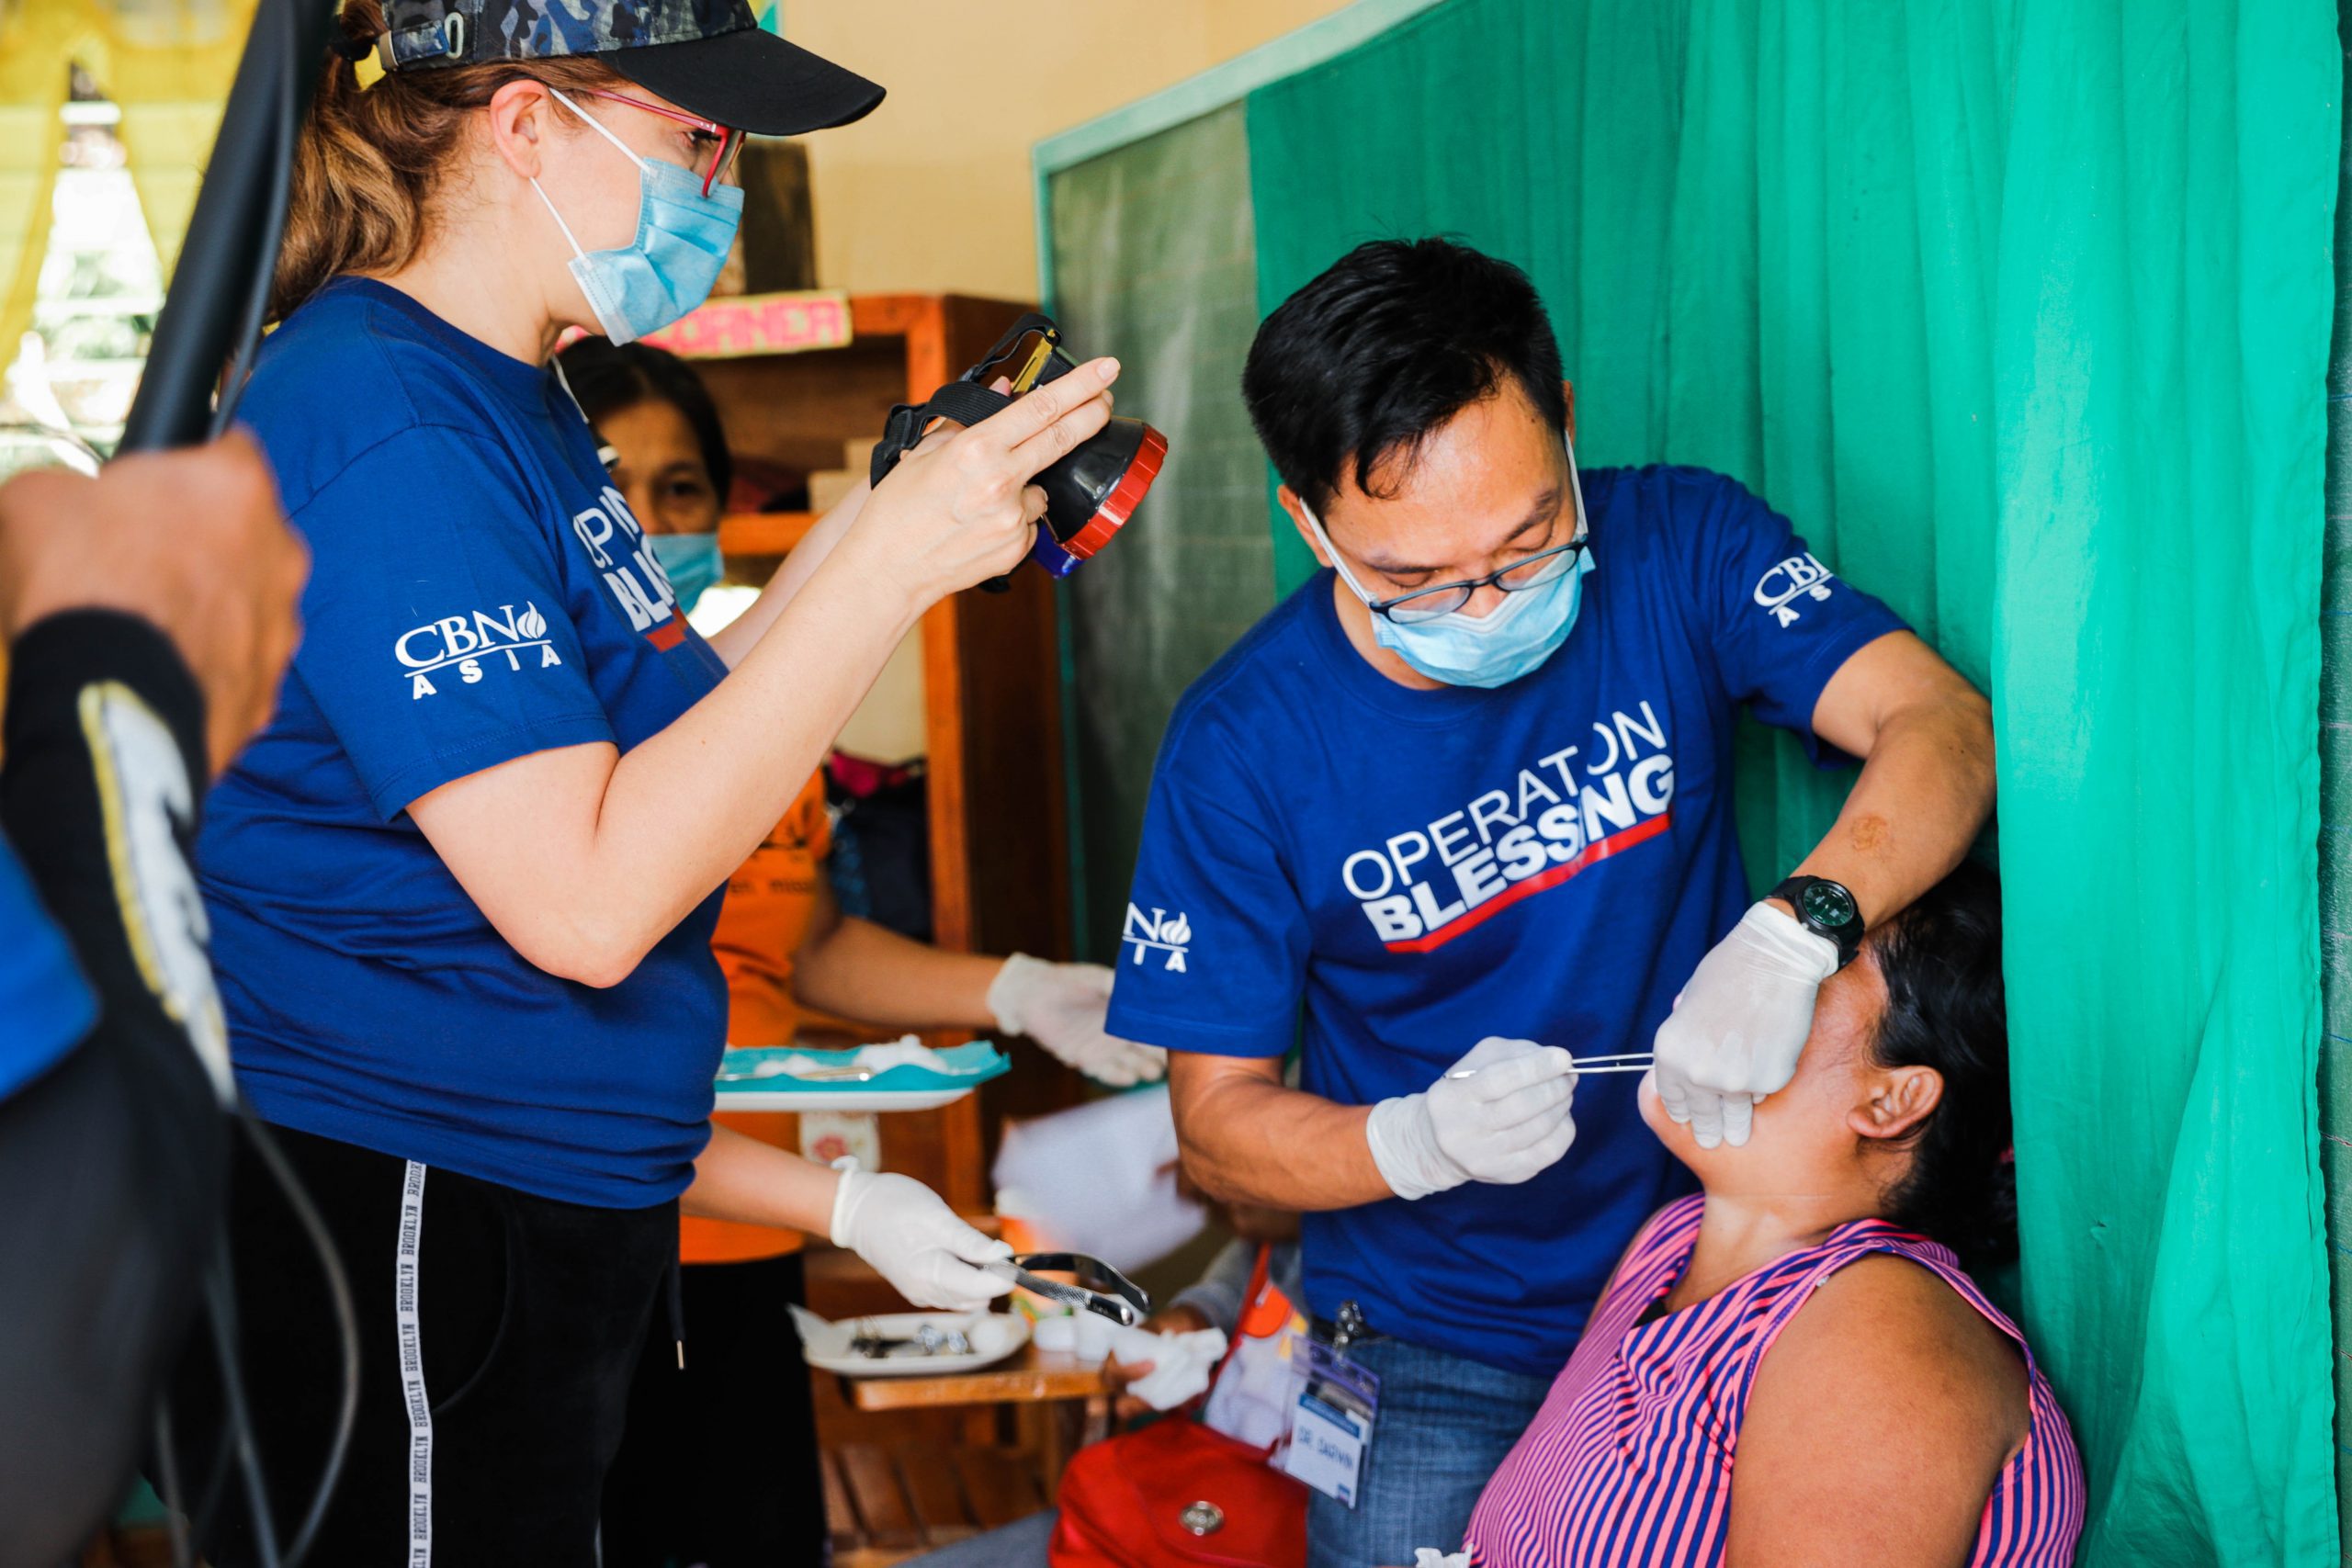 After 10 years, Rebecca’s prayer has been answered through Operation Blessing’s Bohol Medical Mission